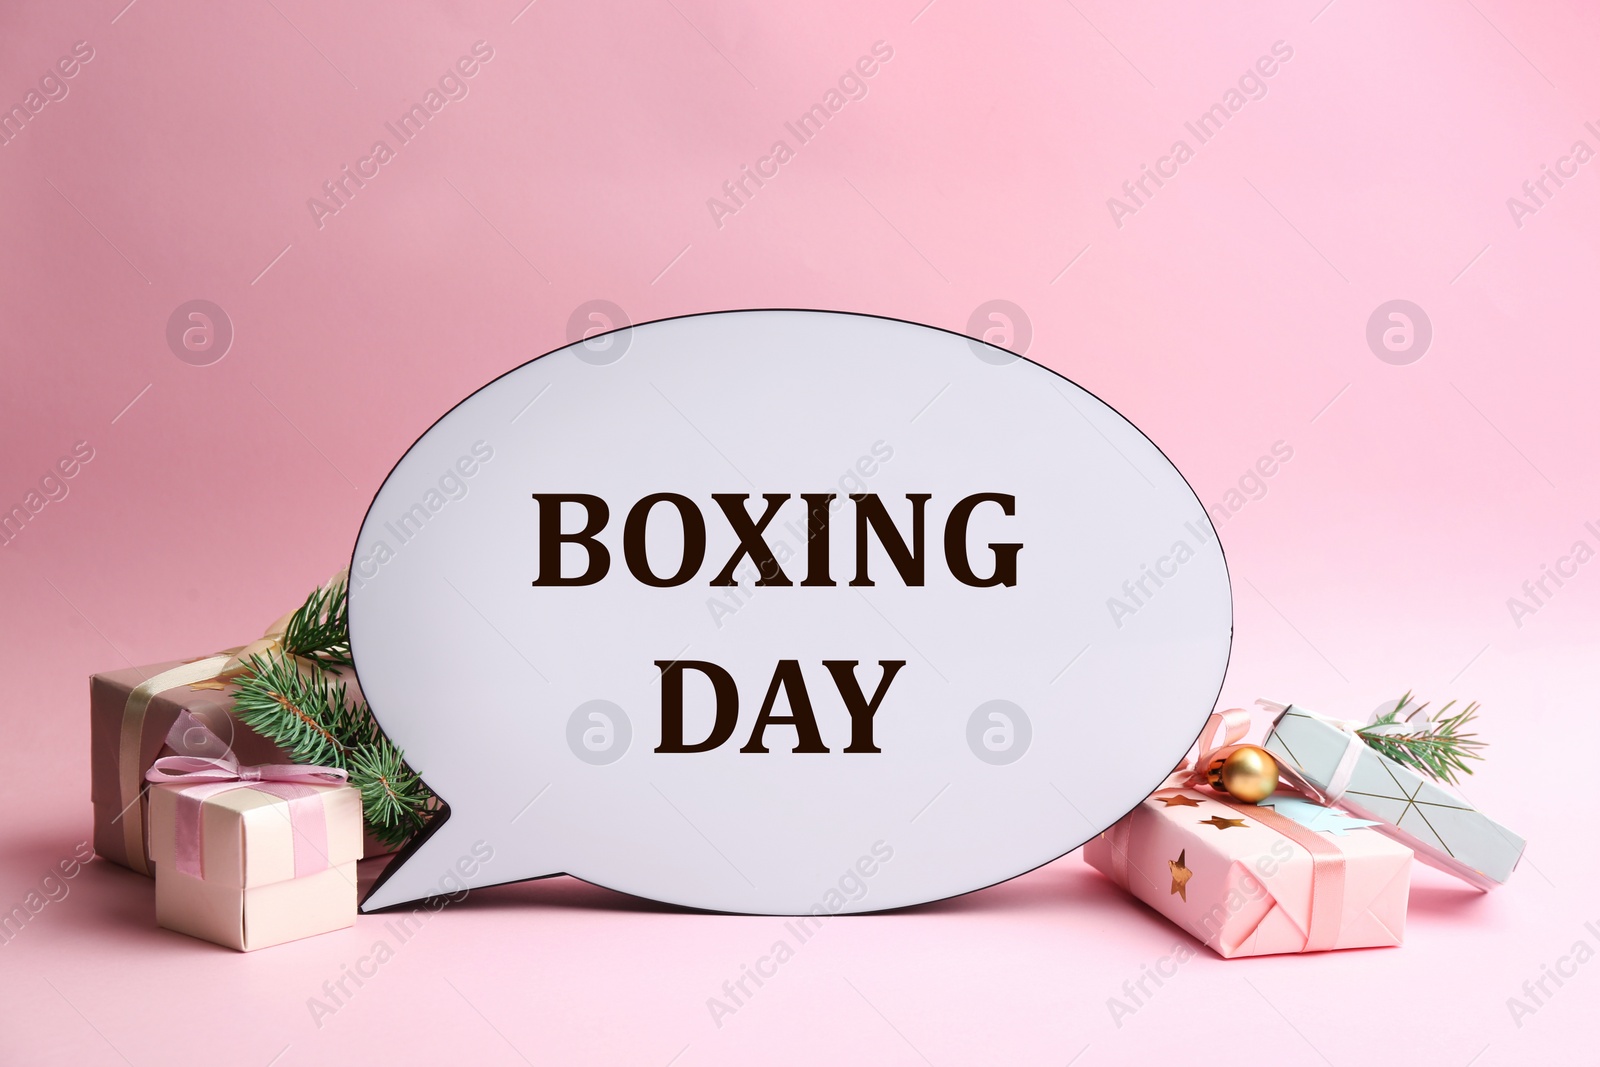 Photo of Speech bubble with phrase BOXING DAY and Christmas decorations on light pink background